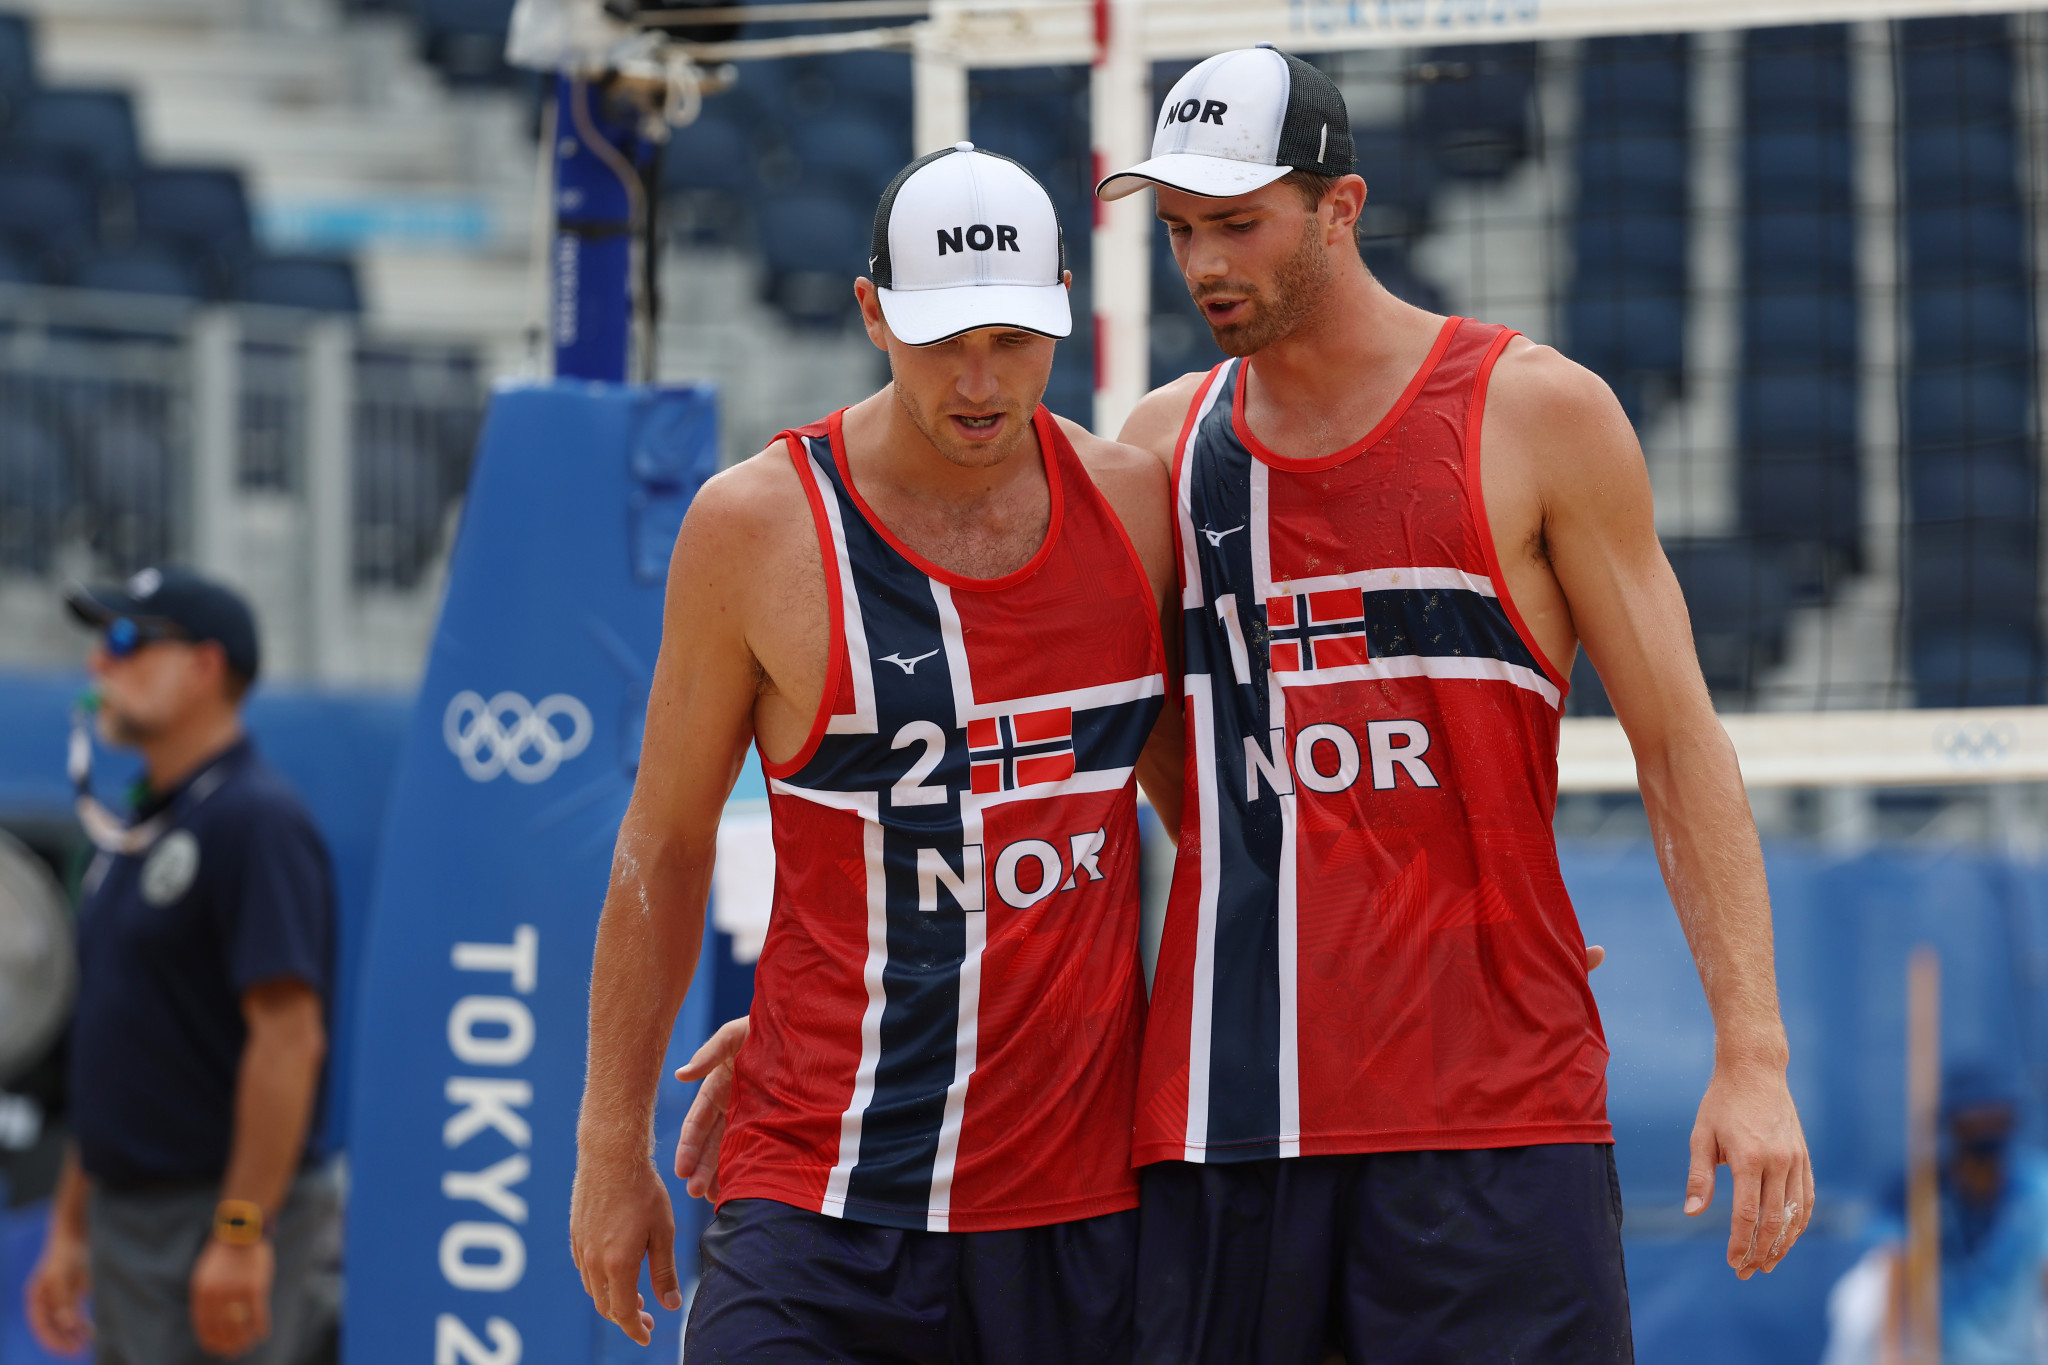 Norway's Anders Mol and Christian Sørum will be aiming to retain their world title in Mexico in 2023 having won this year's title in Rome ©Getty Images